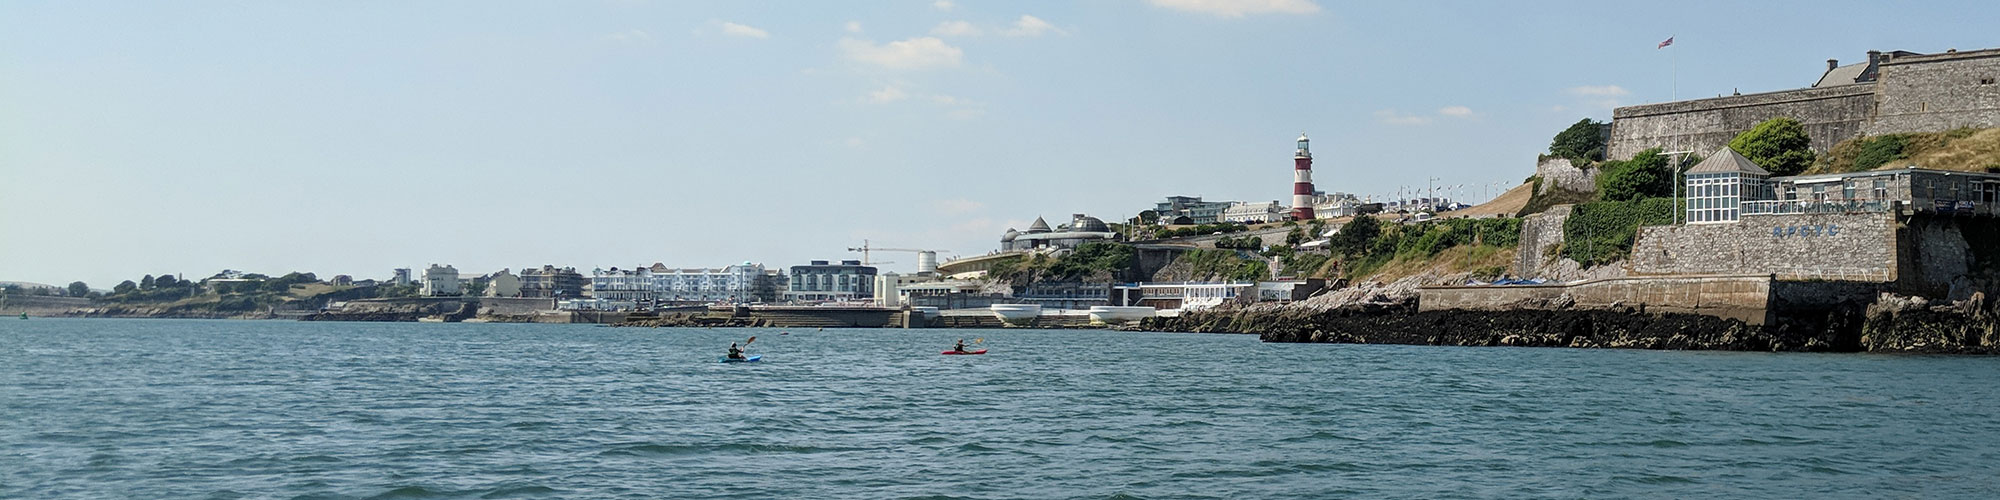 Image of Plymouth sound with two kayakers in the foreground